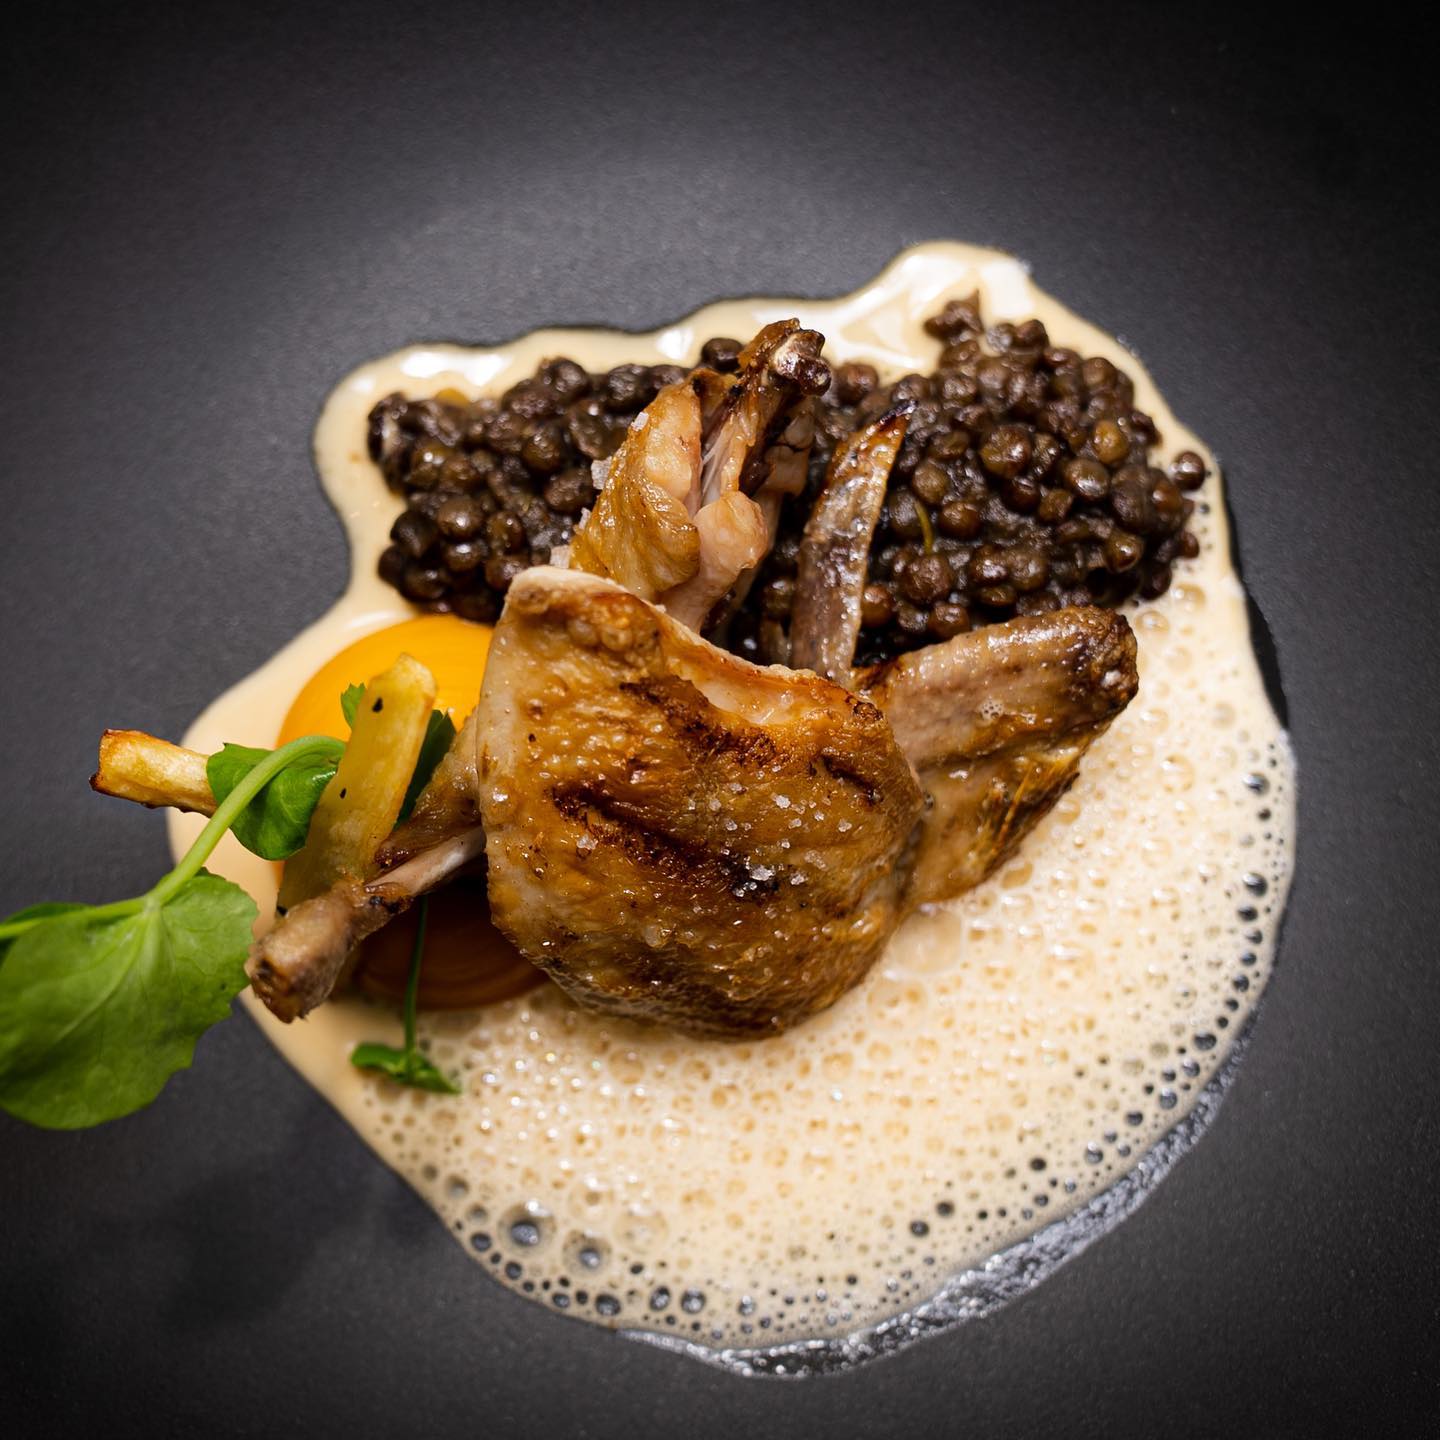 Roasted quail with lentils and carrots at Restaurant Bussia.